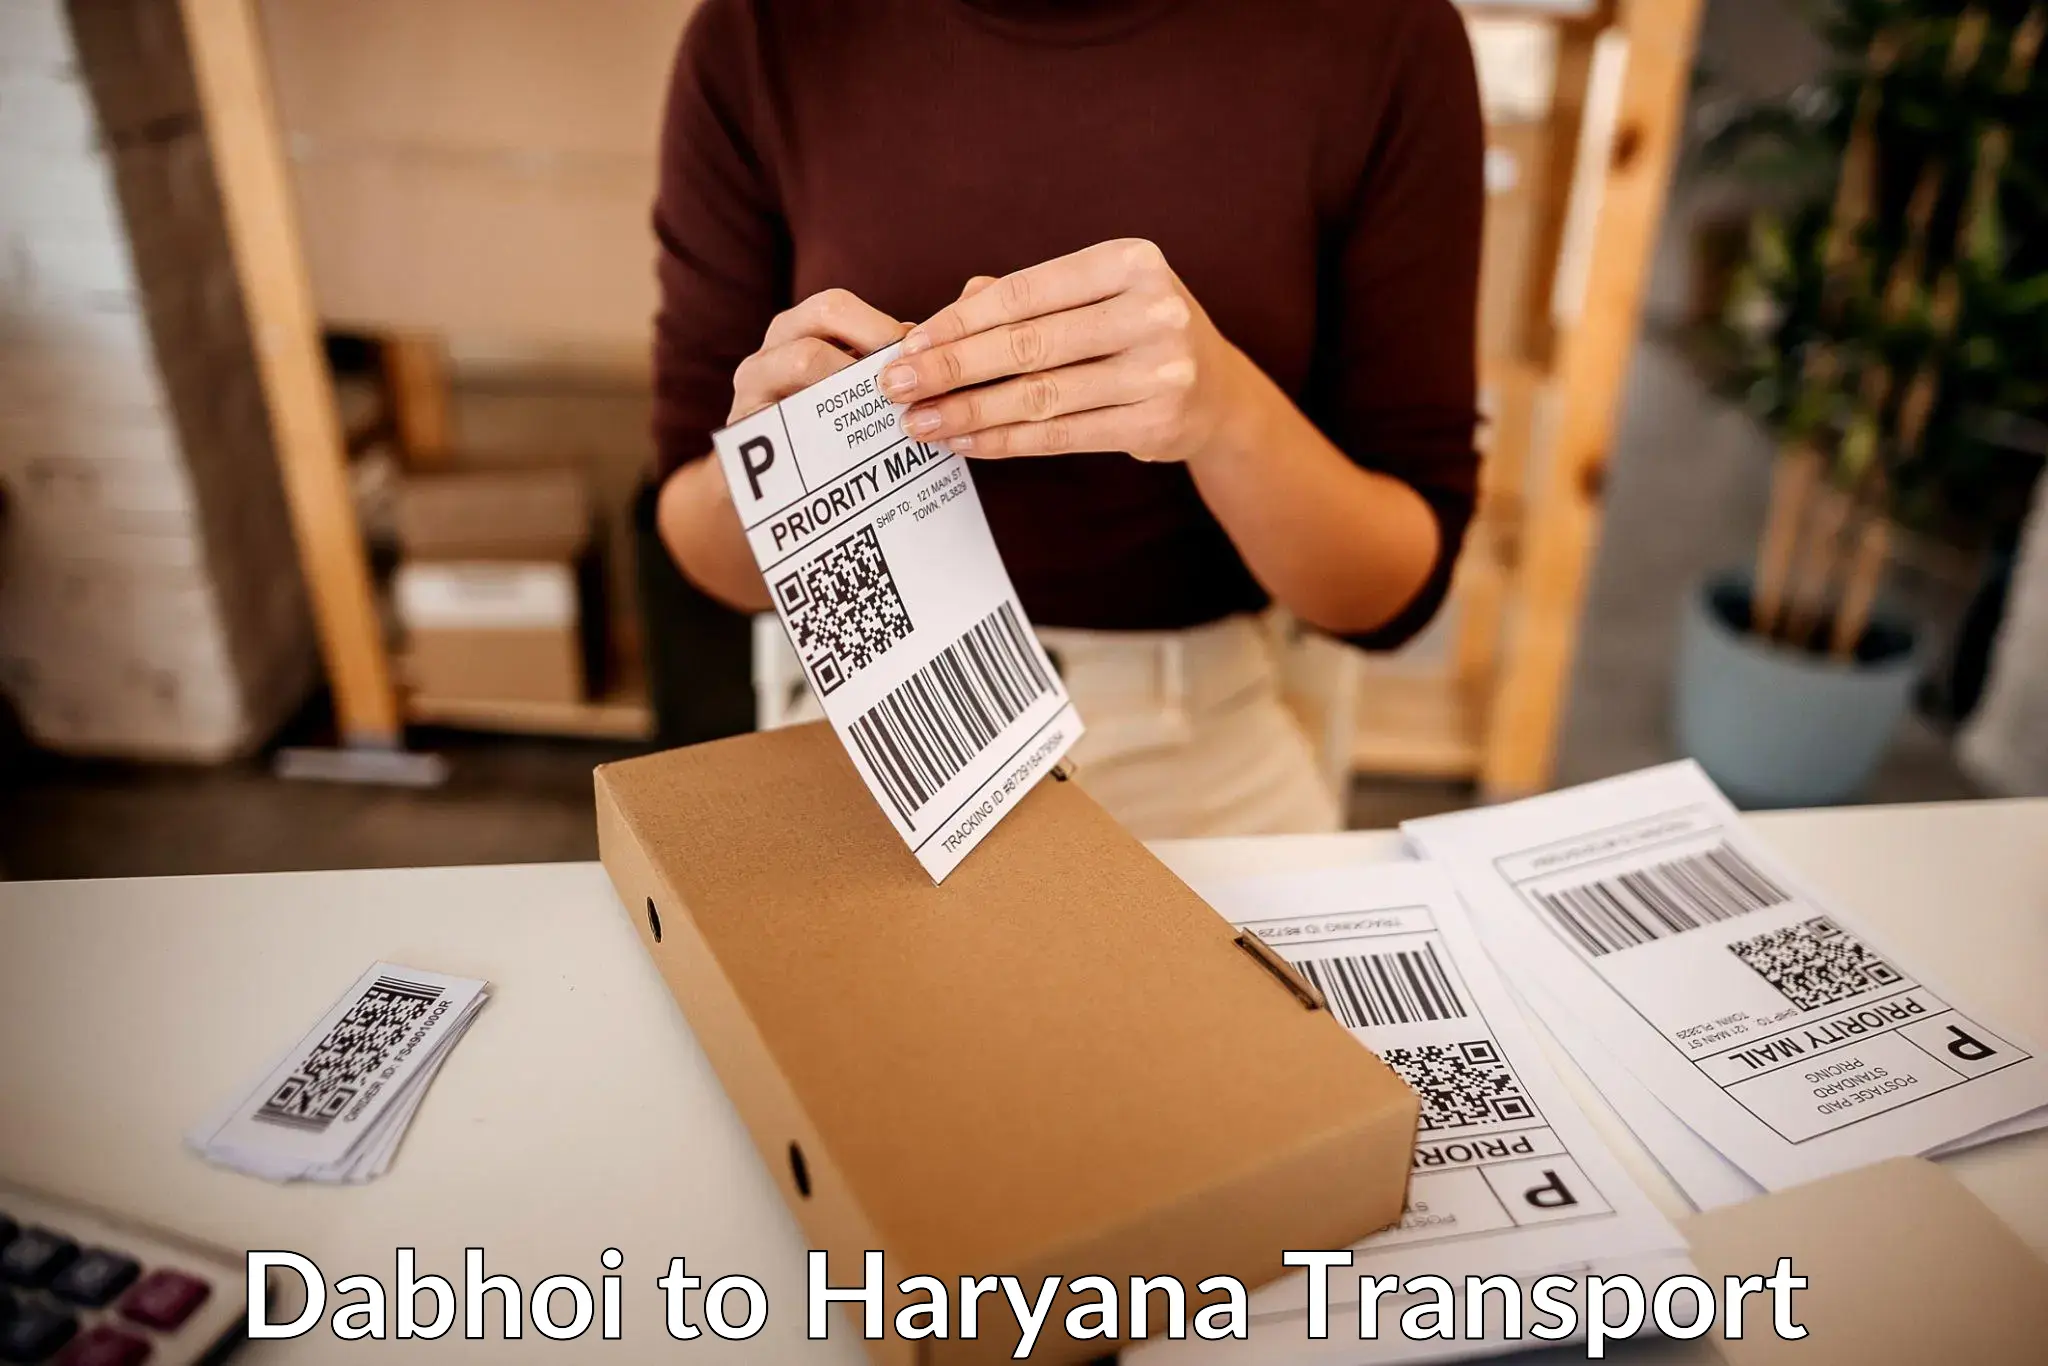 Road transport services in Dabhoi to Gurugram